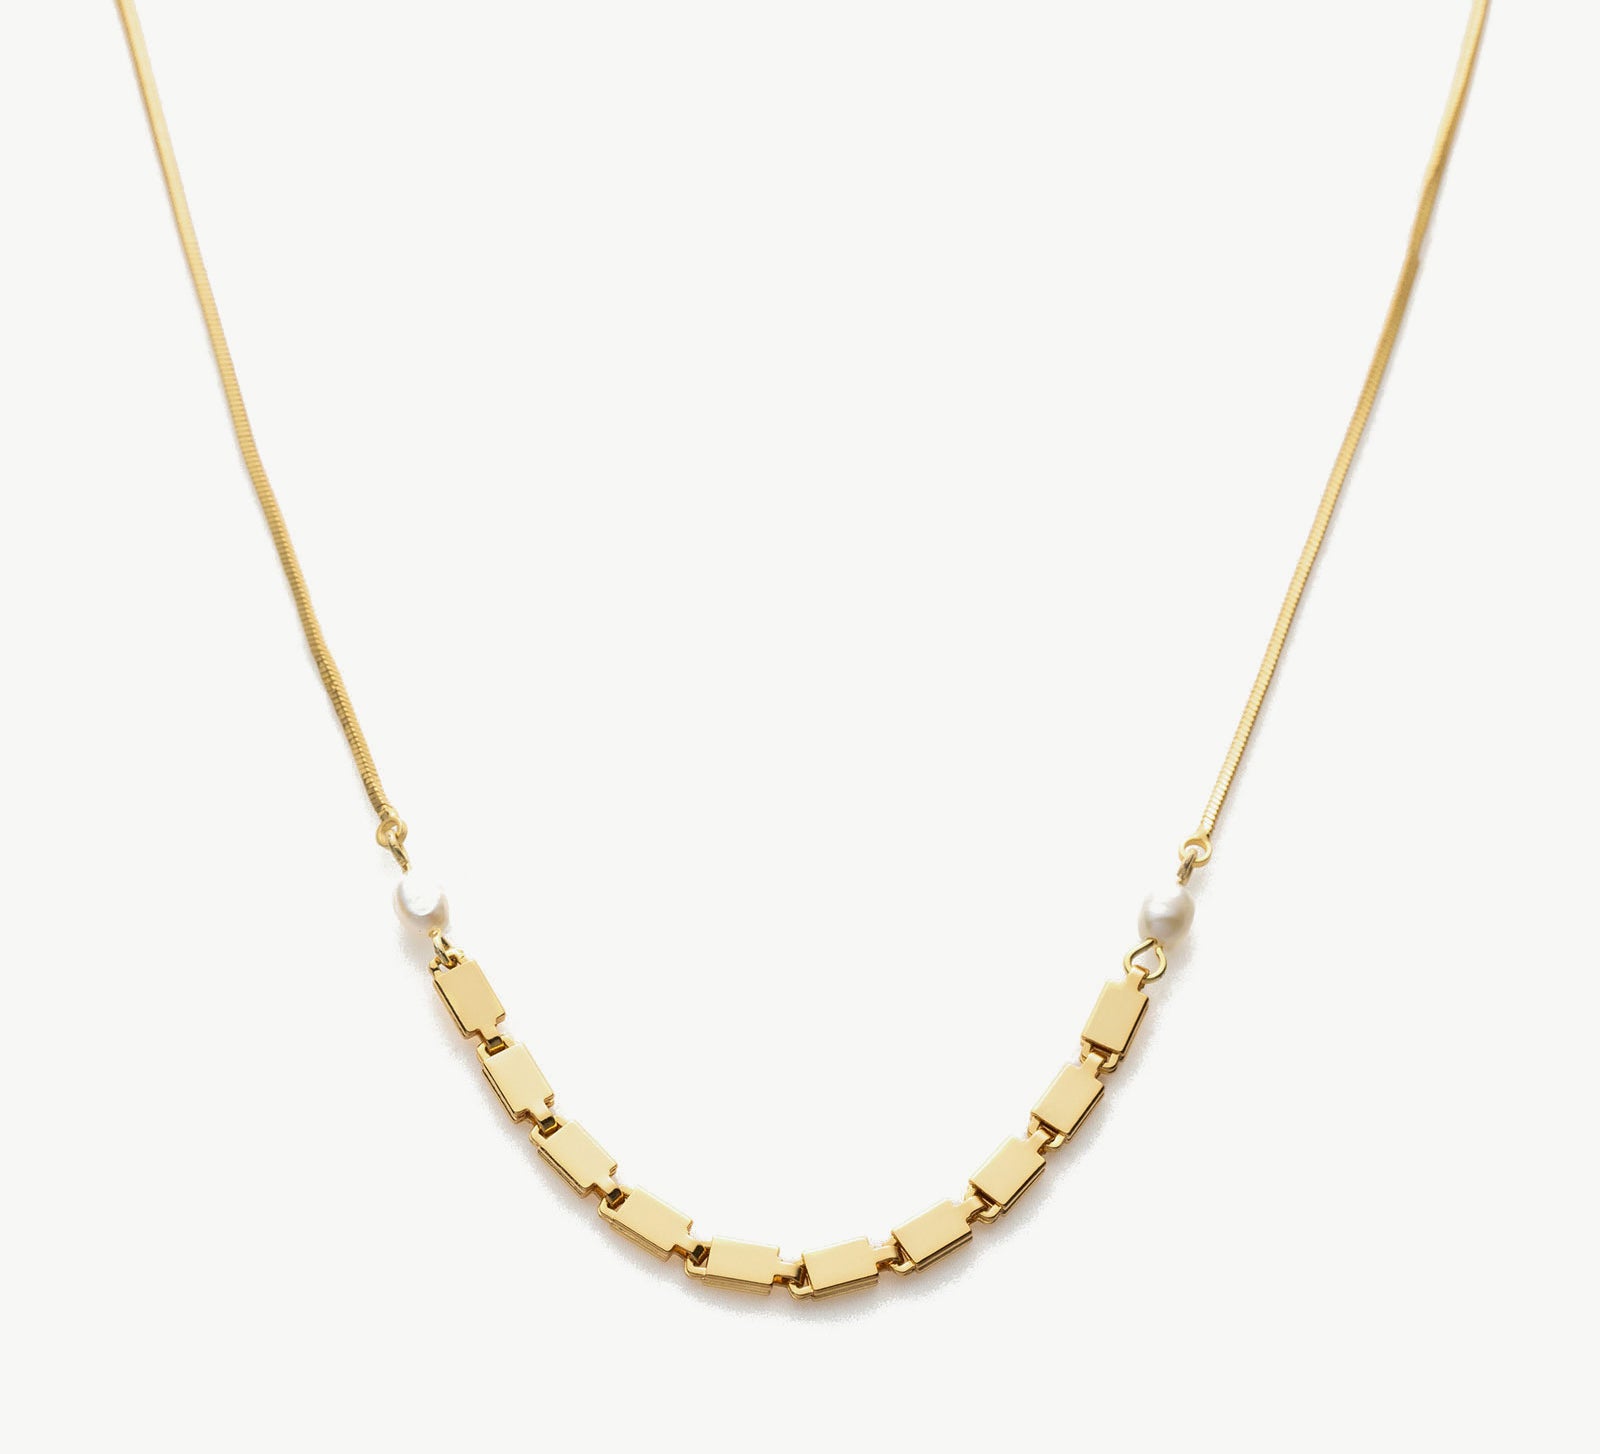  Pearl Chain Necklace, a timeless piece featuring a delicate chain adorned with lustrous pearls, adding a touch of elegance and sophistication to your neckline